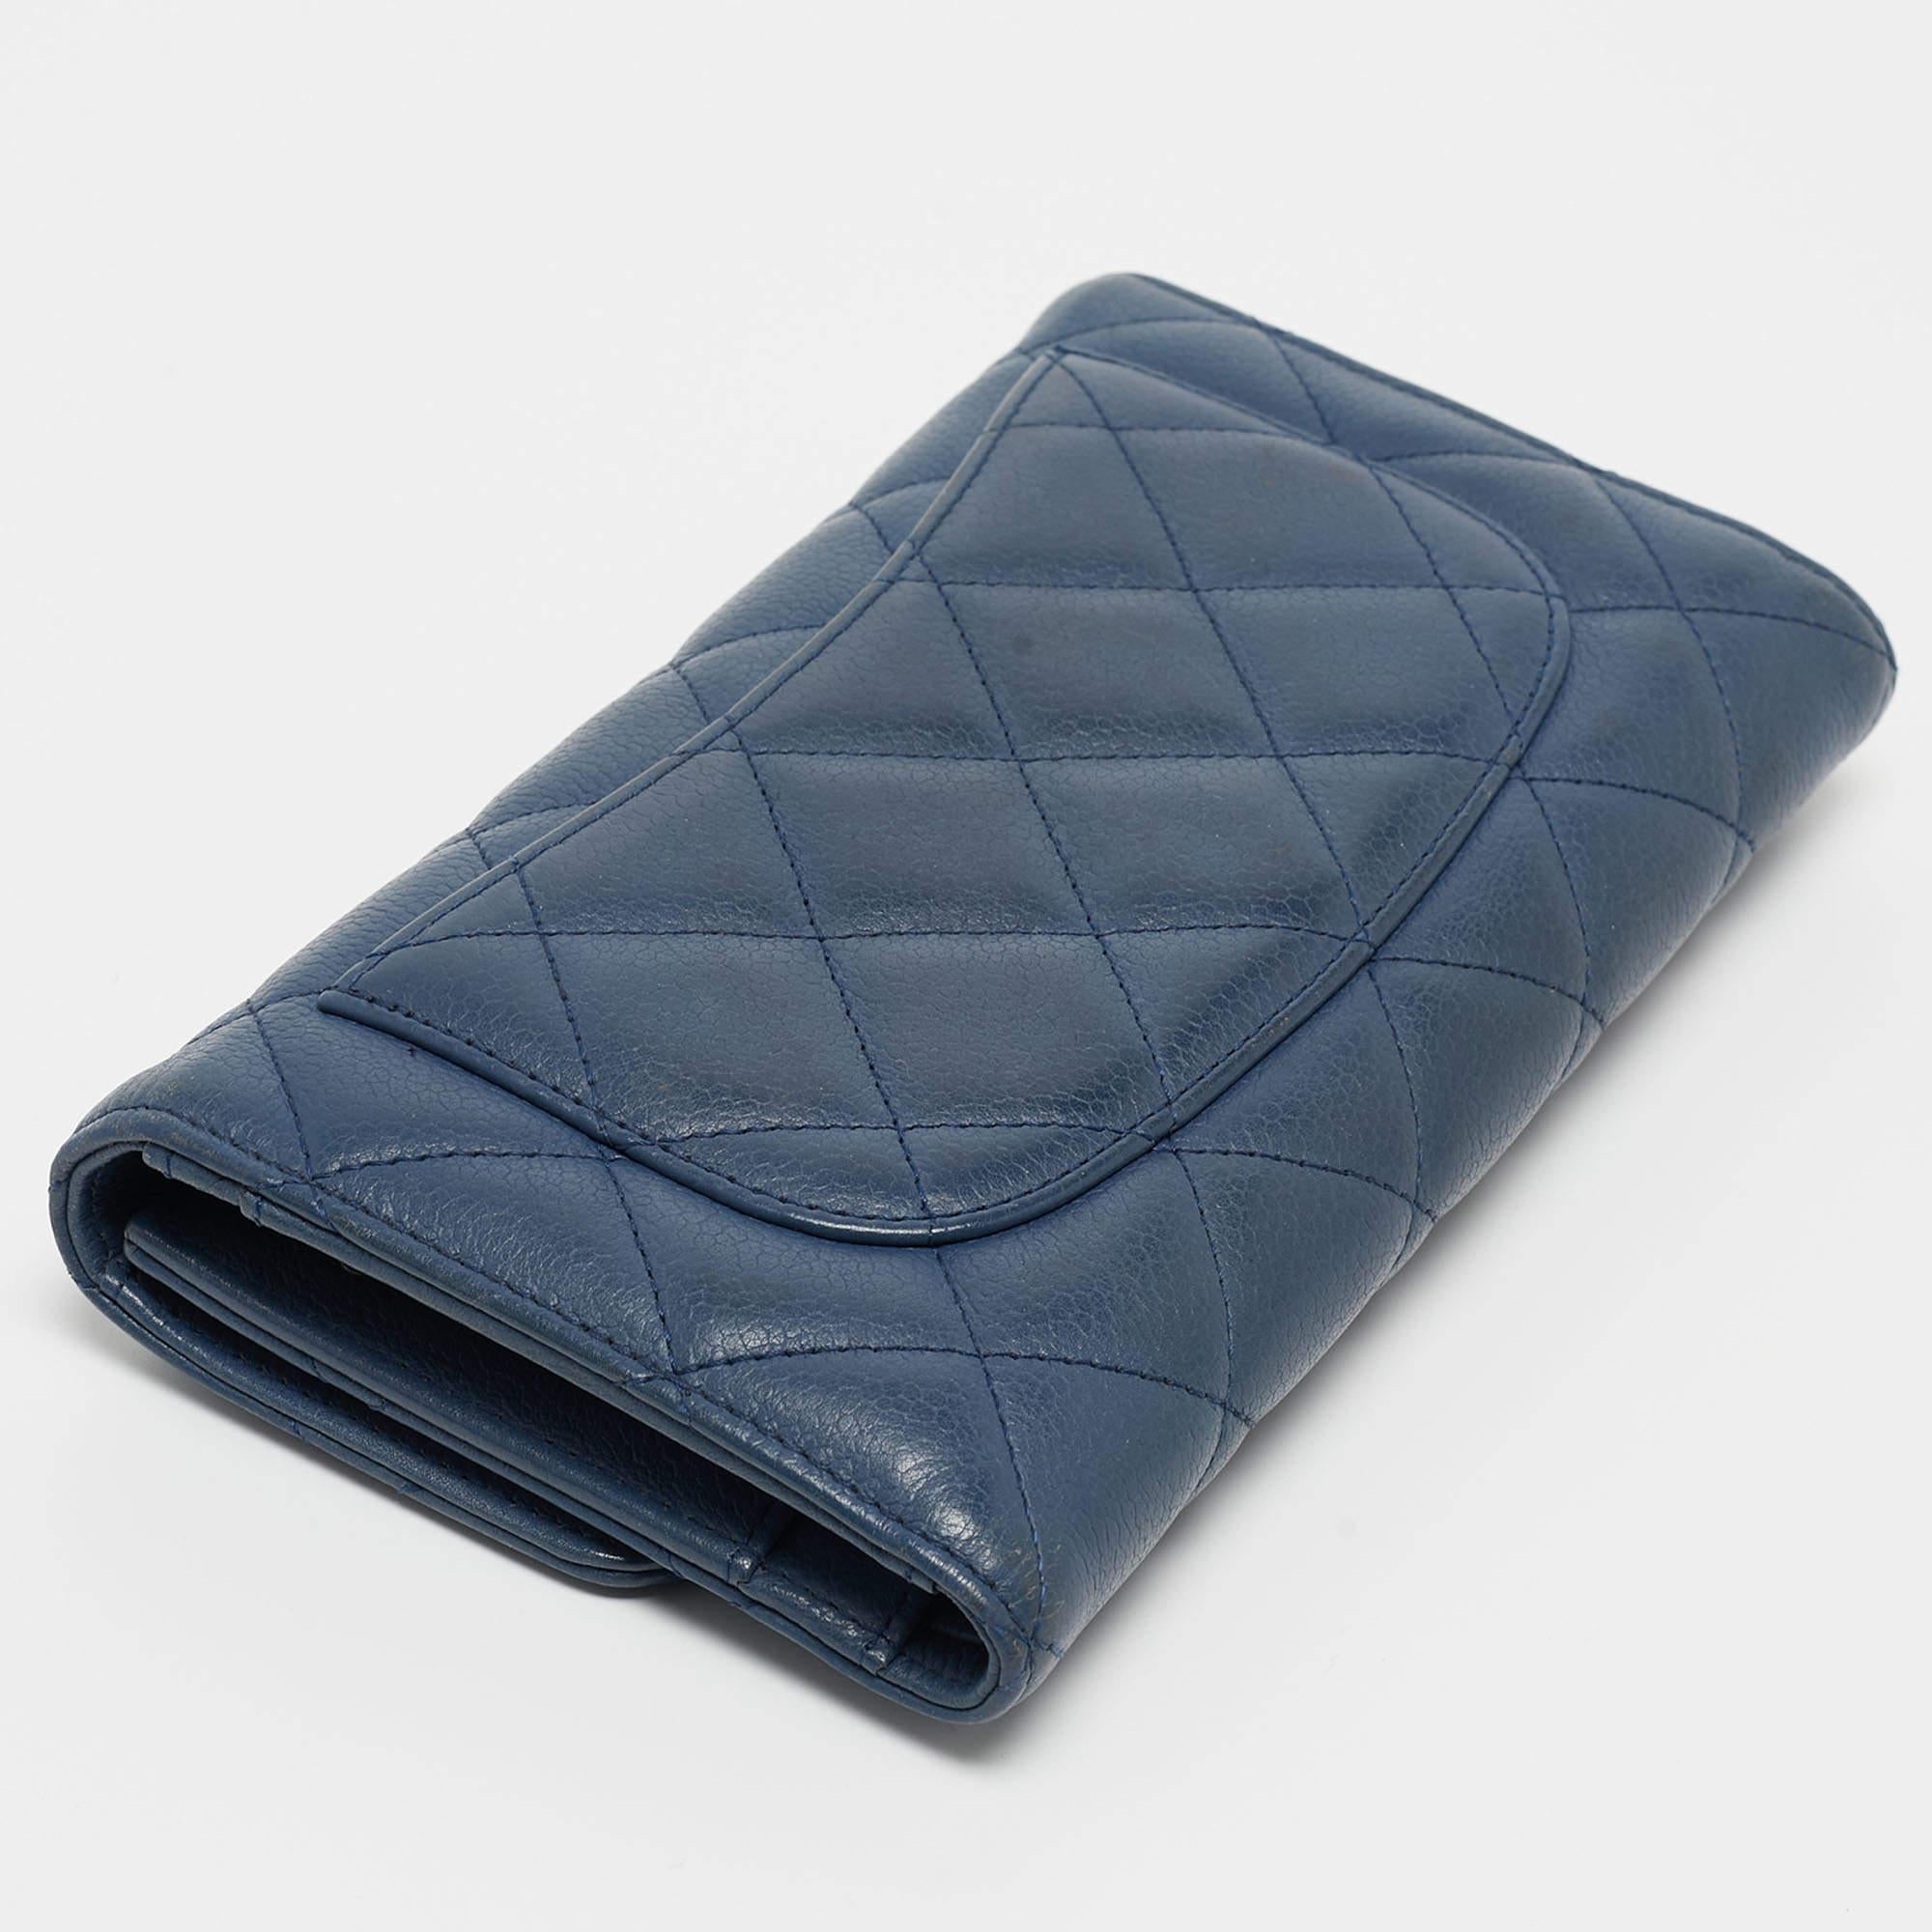 This Chanel Classic Flap wallet is an immaculate balance of sophistication and utility. It has been designed using prime quality materials and elevated by a sleek finish. The creation is equipped with ample space for your monetary